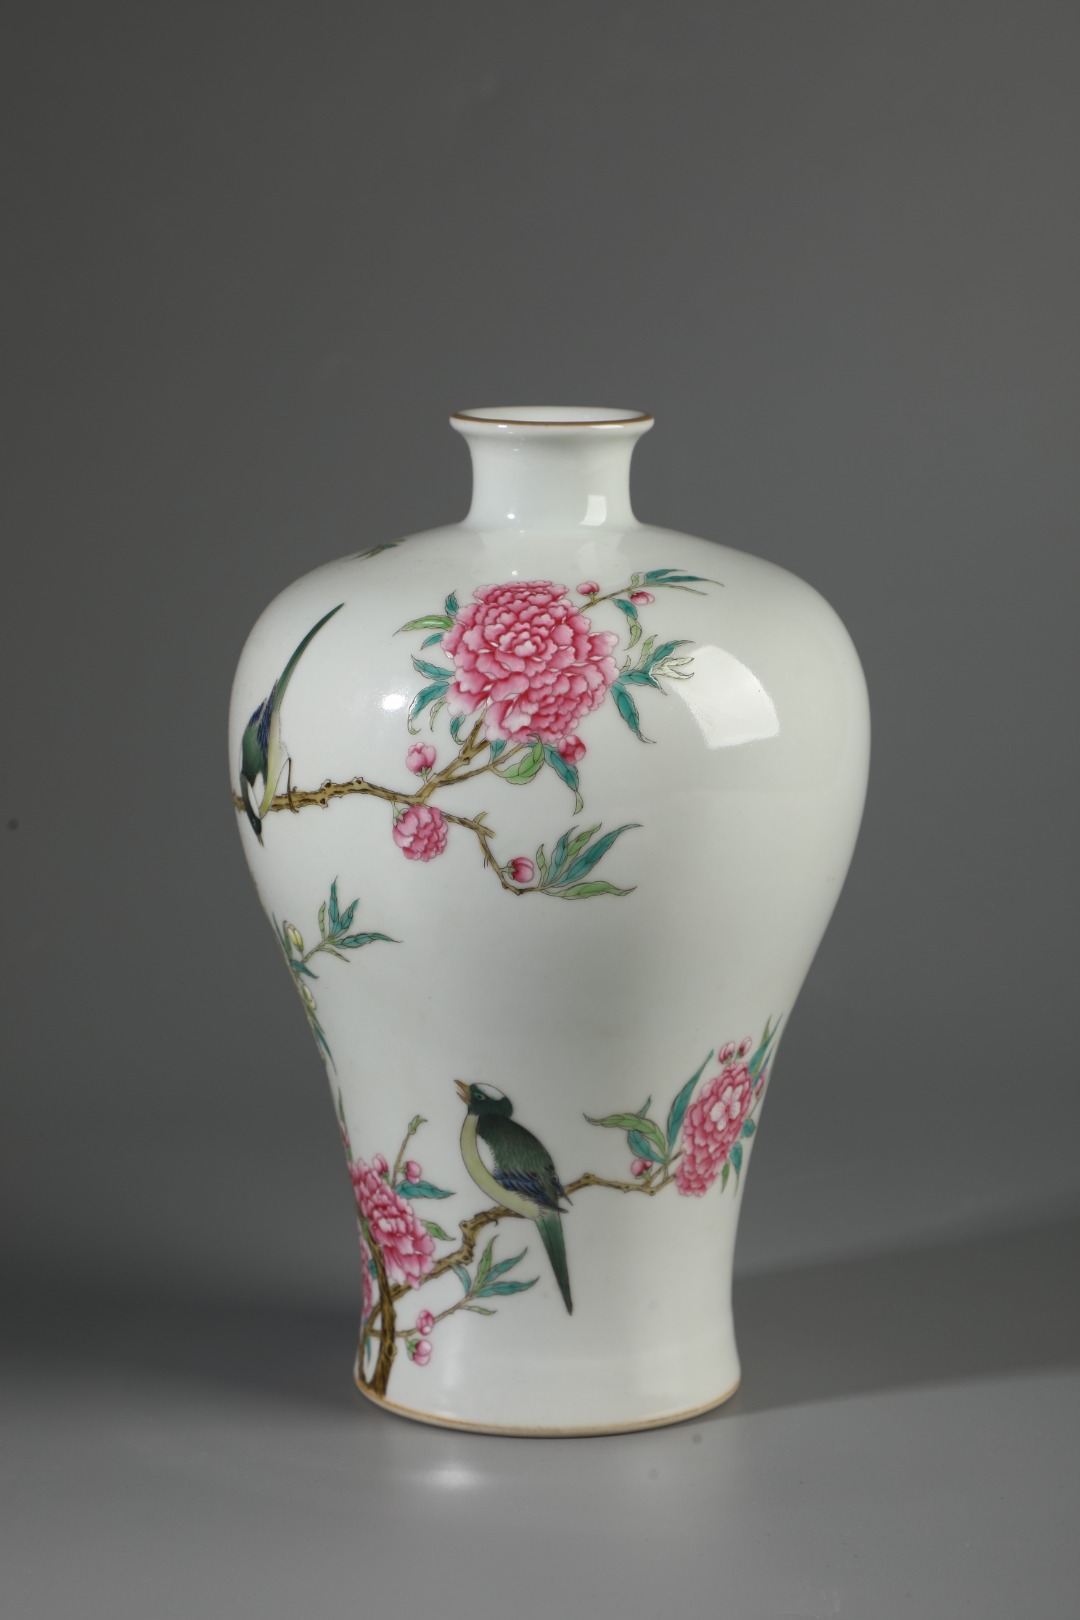 Famille rose plum vase made during the Yongzheng period of the Qing Dynasty - Image 5 of 9